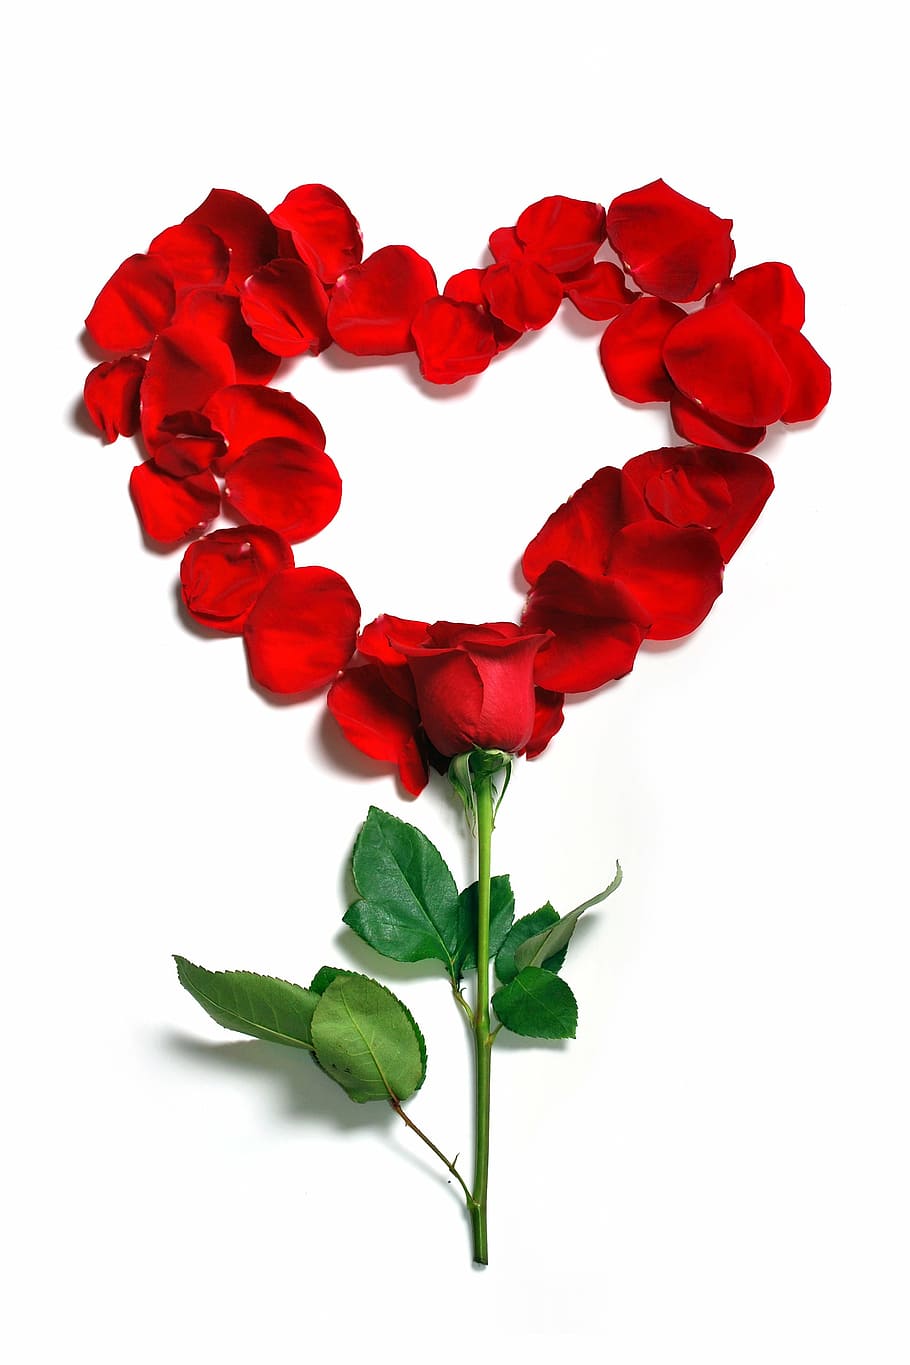 red, rose, heart shape decor, petals, floral, flowers, flower, beautiful, bloom, roses